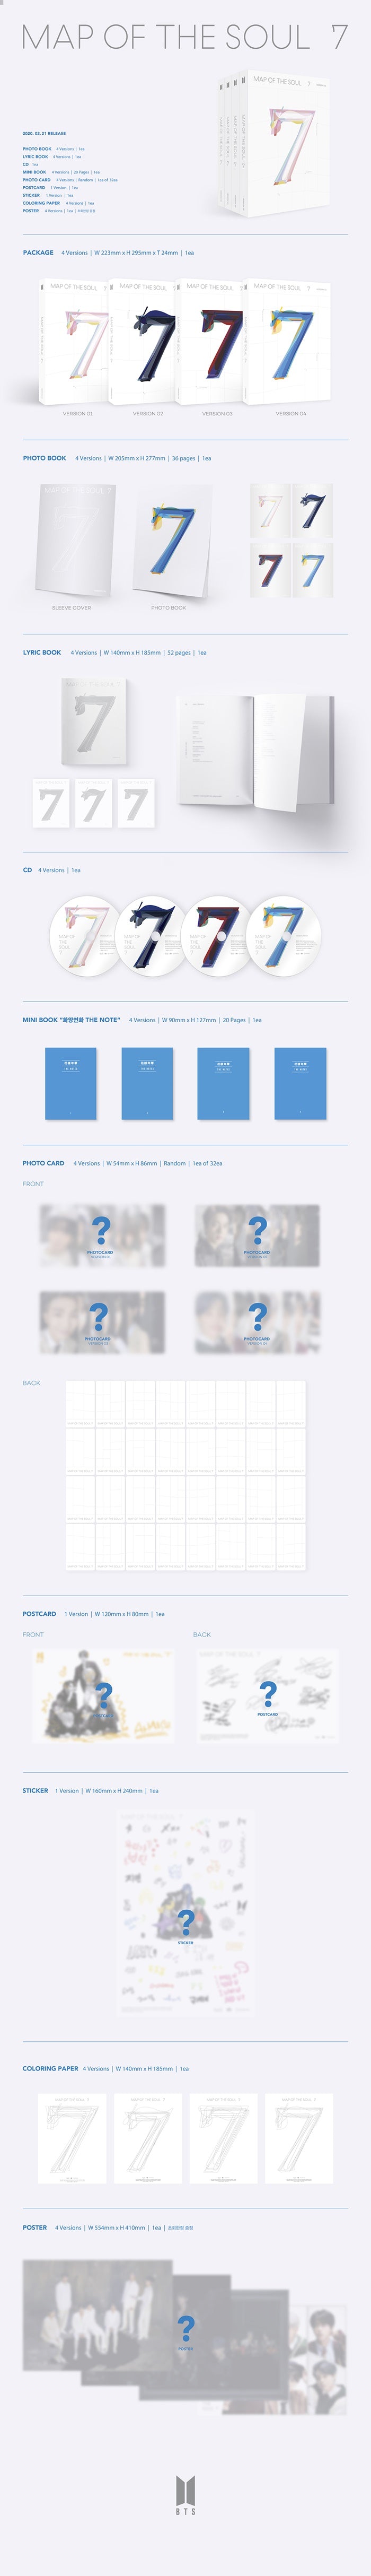 1 CD
1 Photo Book (36 pages)
1 Lyric Book (52 pages)
1 Mini Book (20 pages)
1 Photo Card (random out of 32 types)
1 Postca...